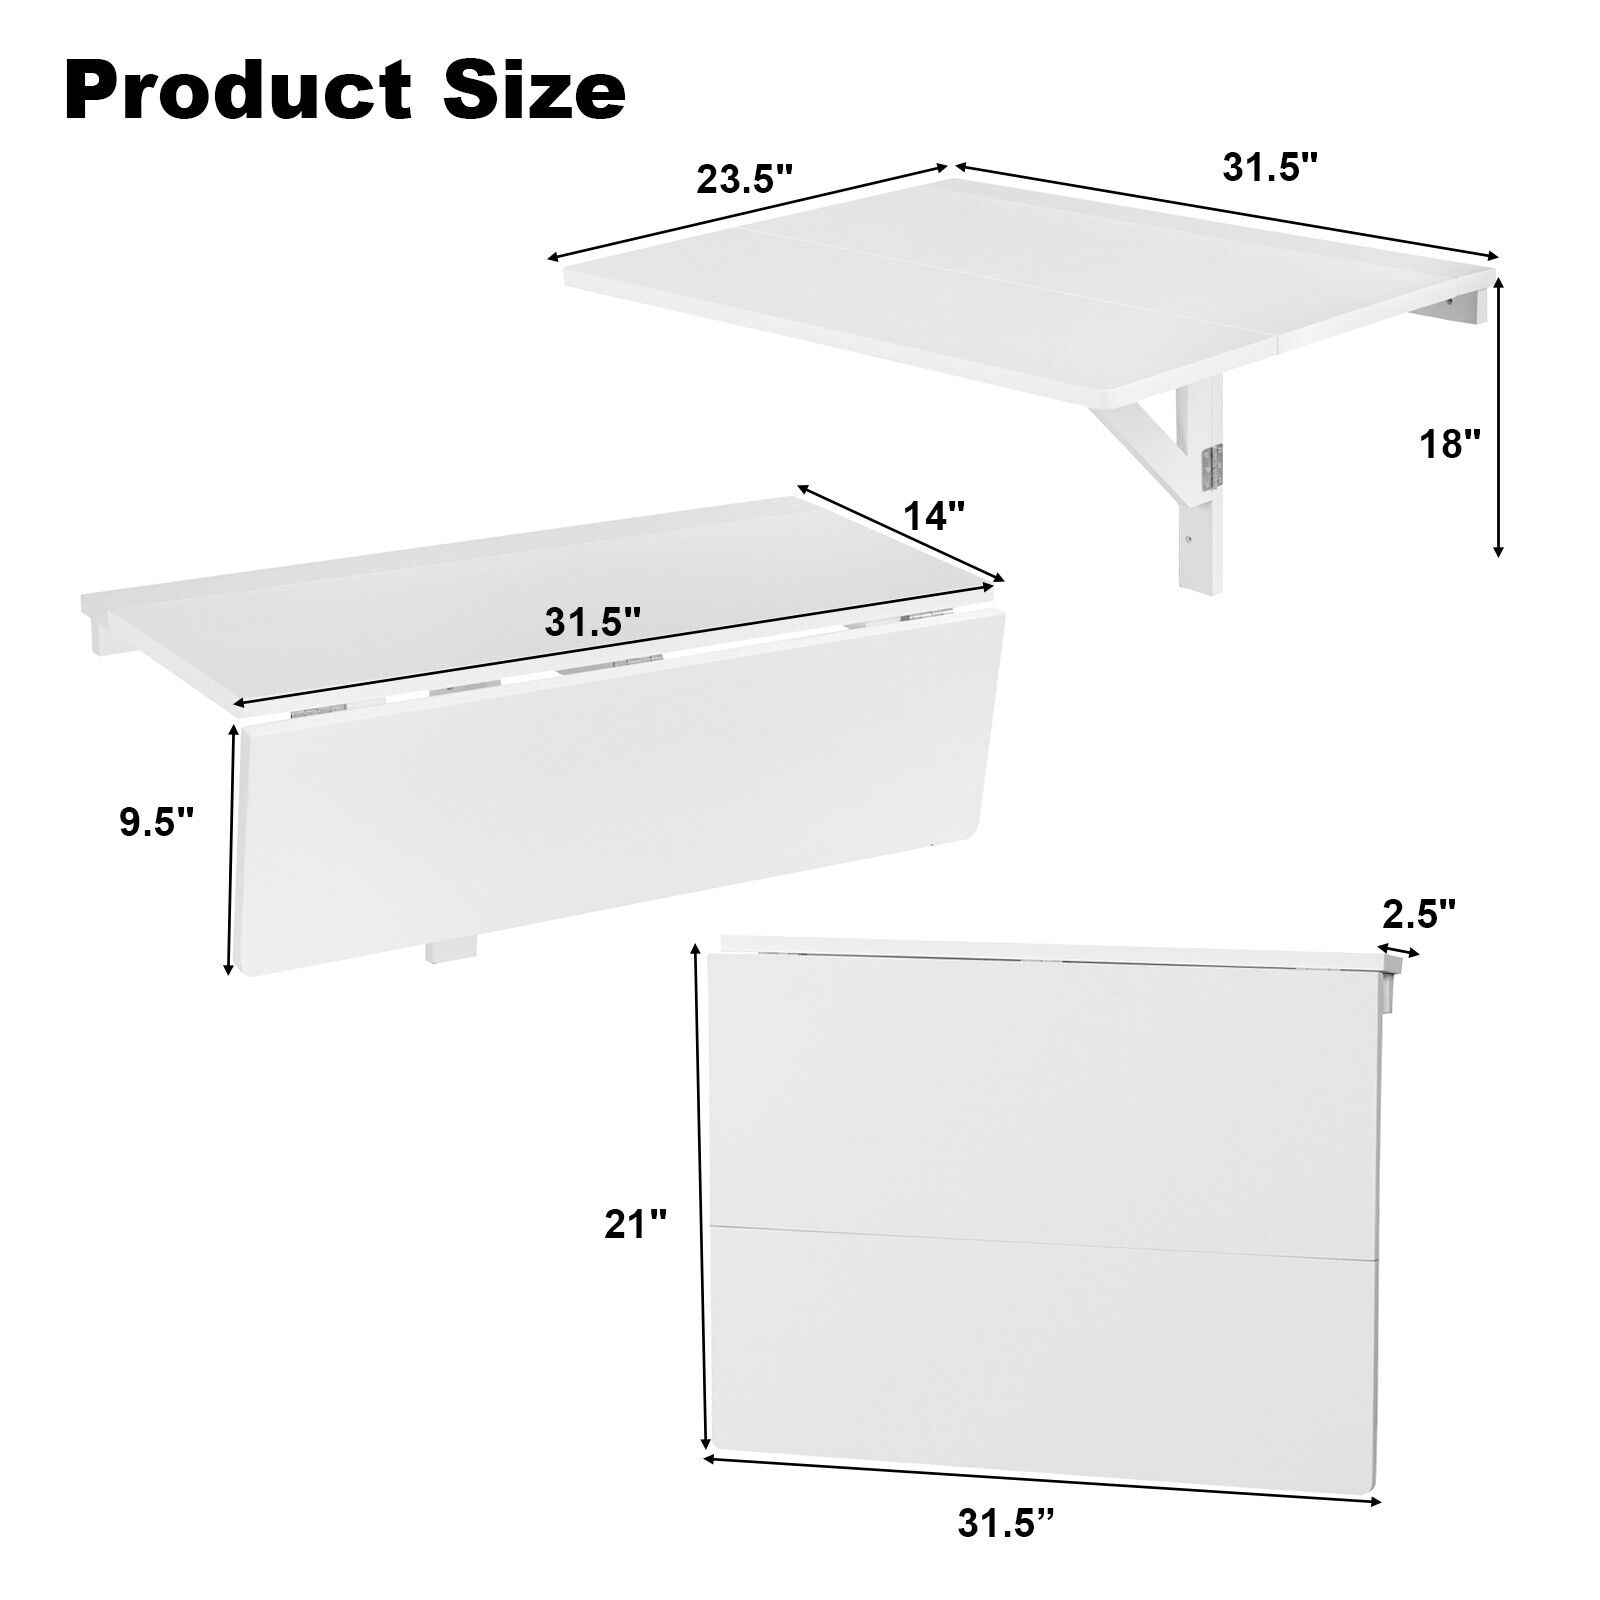 https://ak1.ostkcdn.com/images/products/is/images/direct/3e4015d90796f0a3338894aaf662cca3800c0f7e/Space-Saver-Folding-Wall-Mounted-Drop-Leaf-Table.jpg